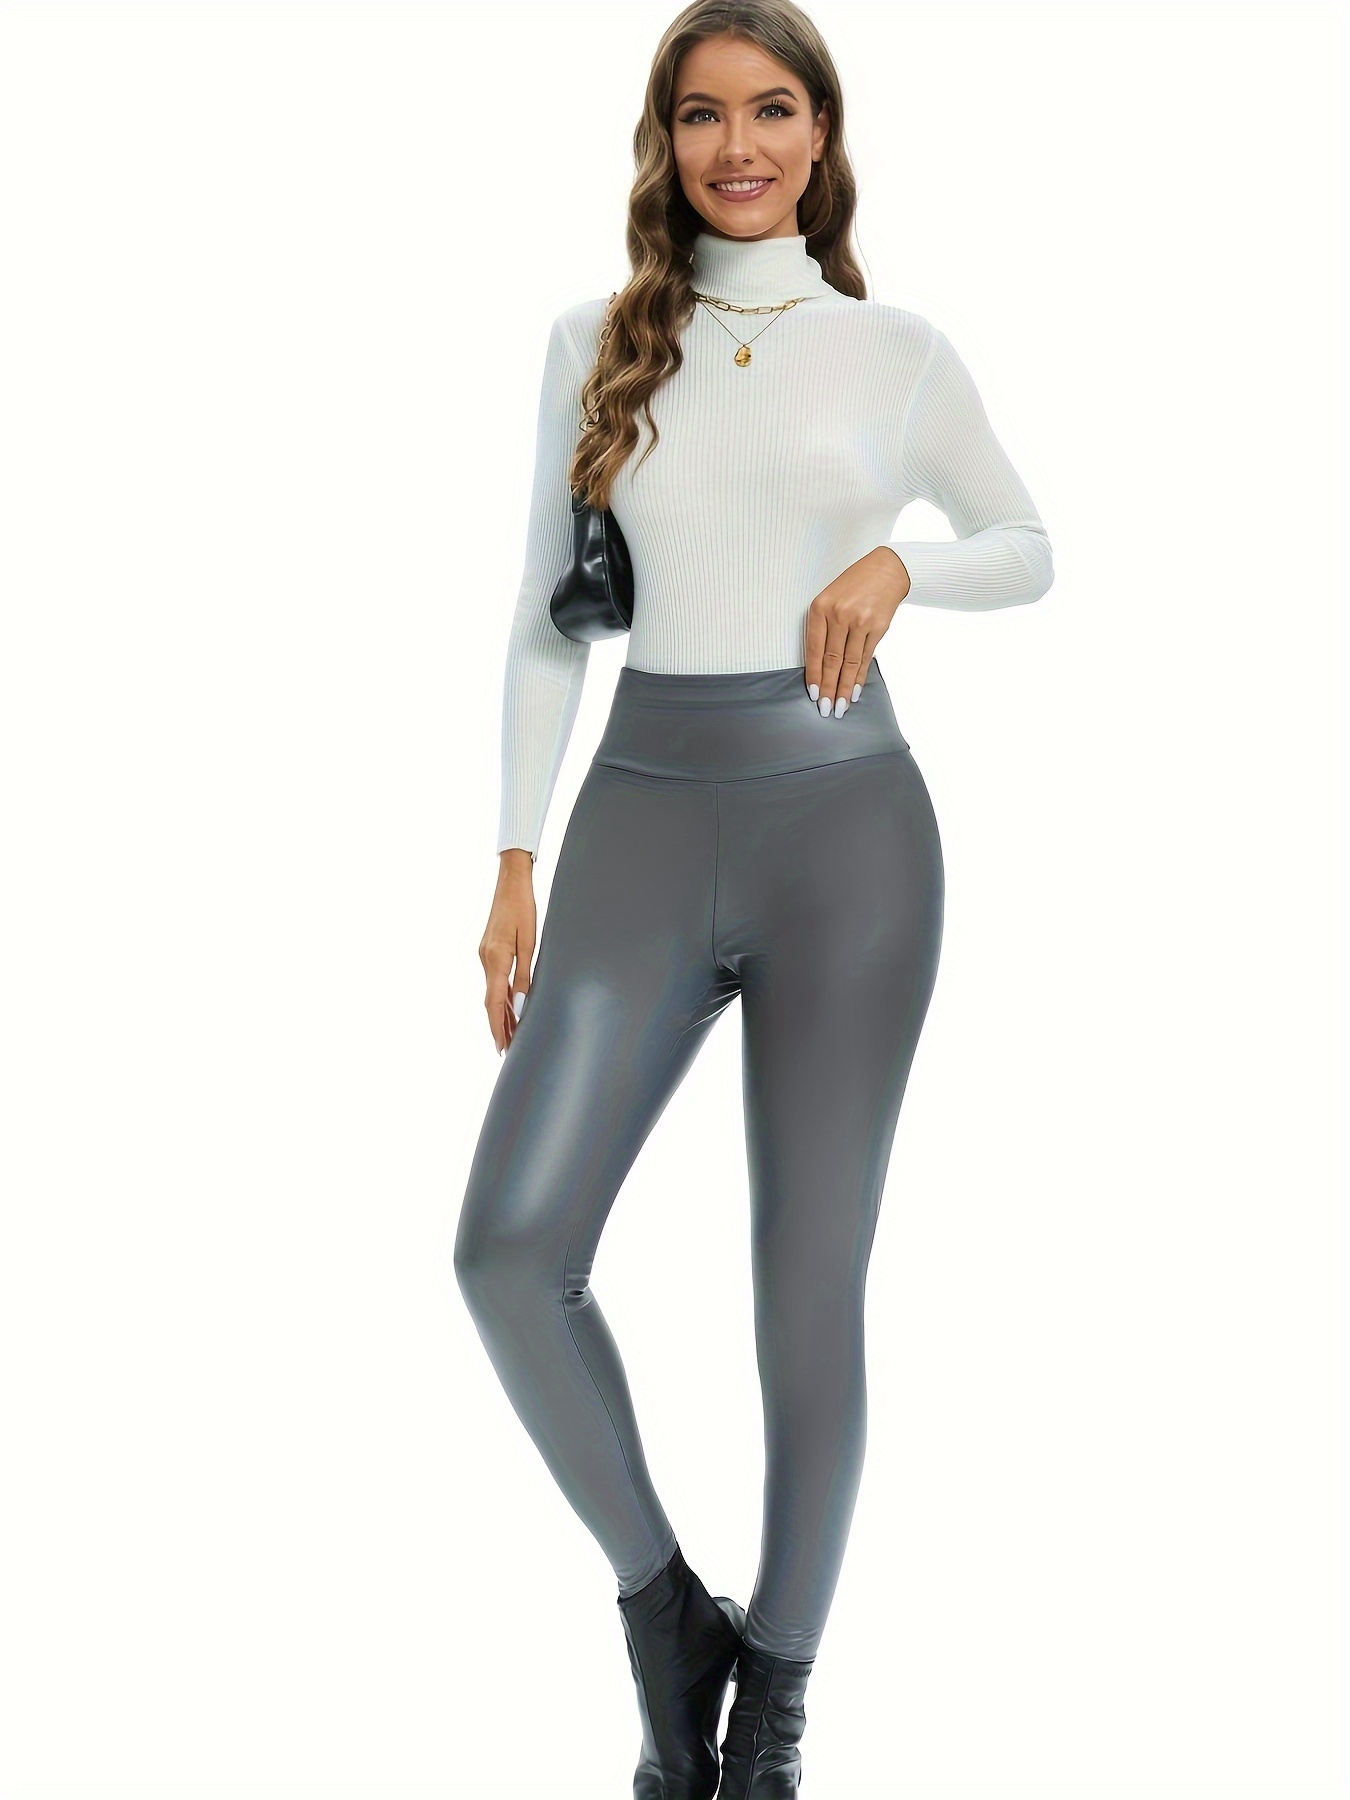 Women Fleece Lined Faux Leather Leggings, Warm High Waisted Yoga Pants  Workout Stretchy Faux Leather Leggings Pants Sexy High Waisted Tights